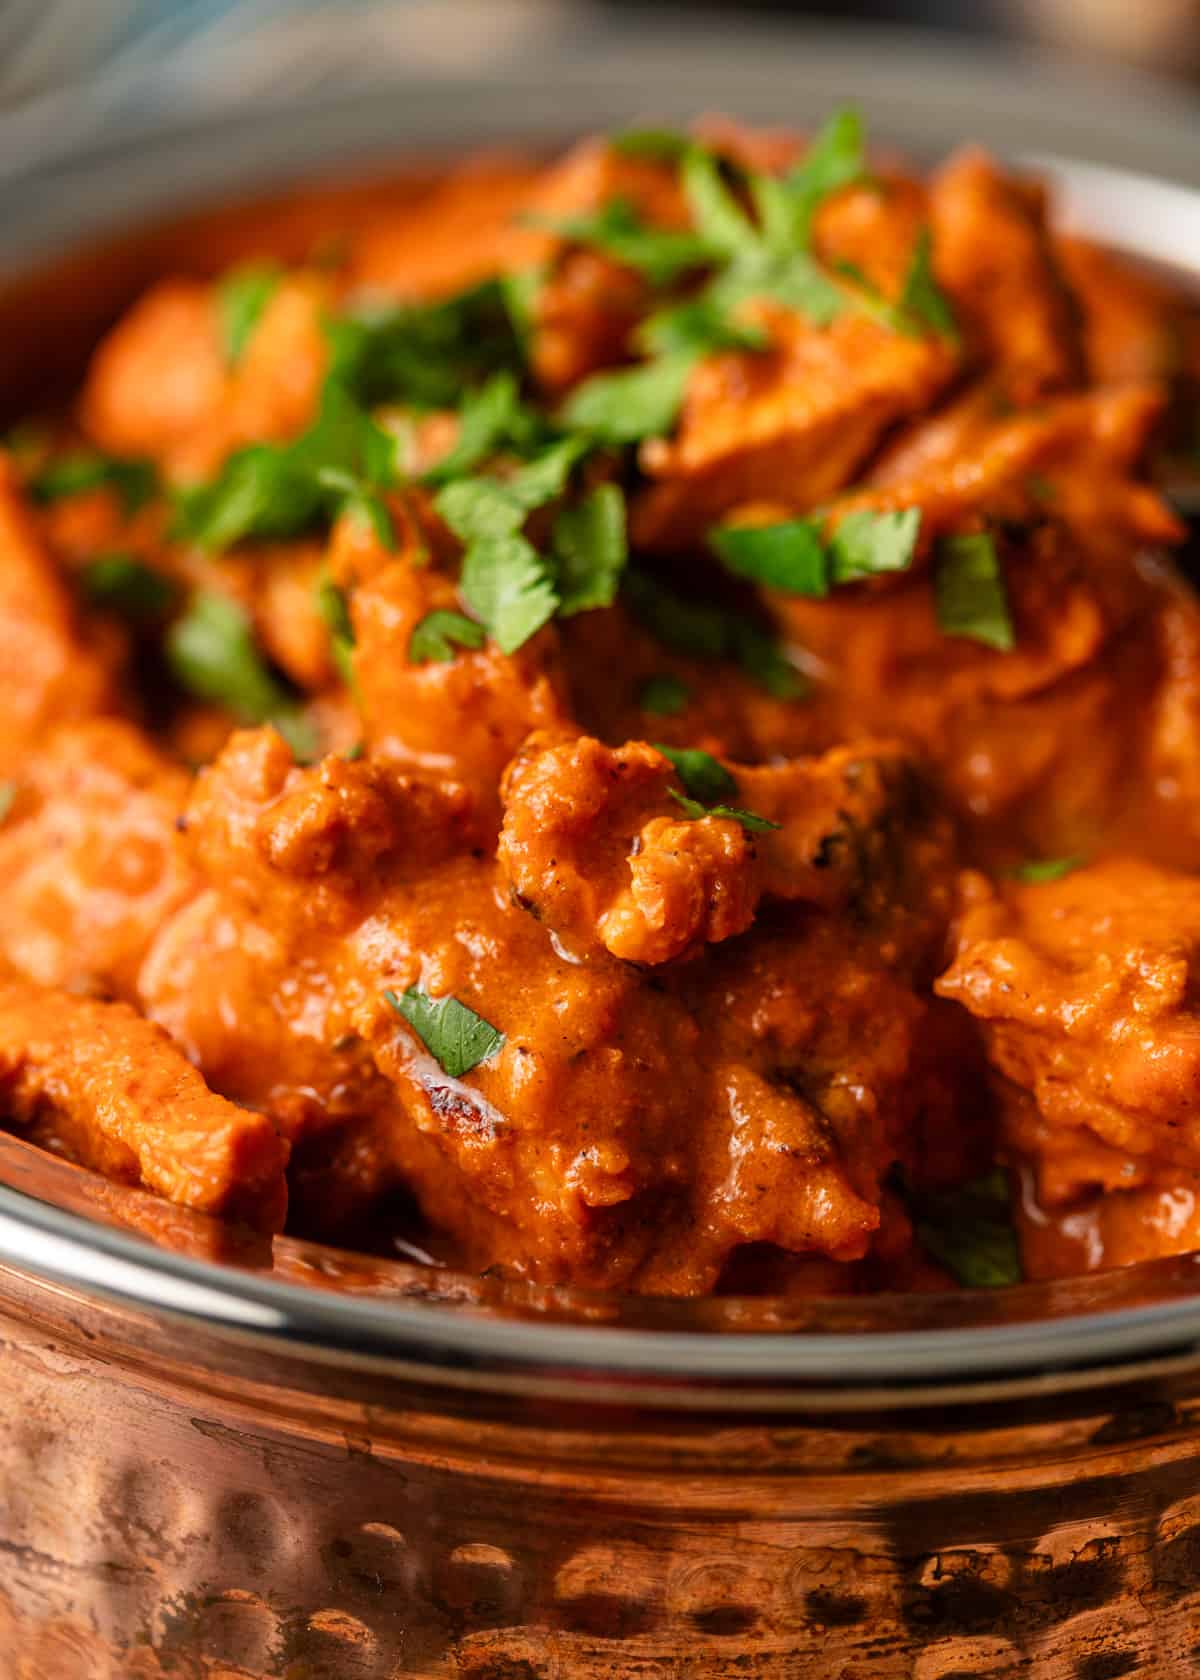 extreme closeup: chicken tikka masala with sauce and fresh herbs showing